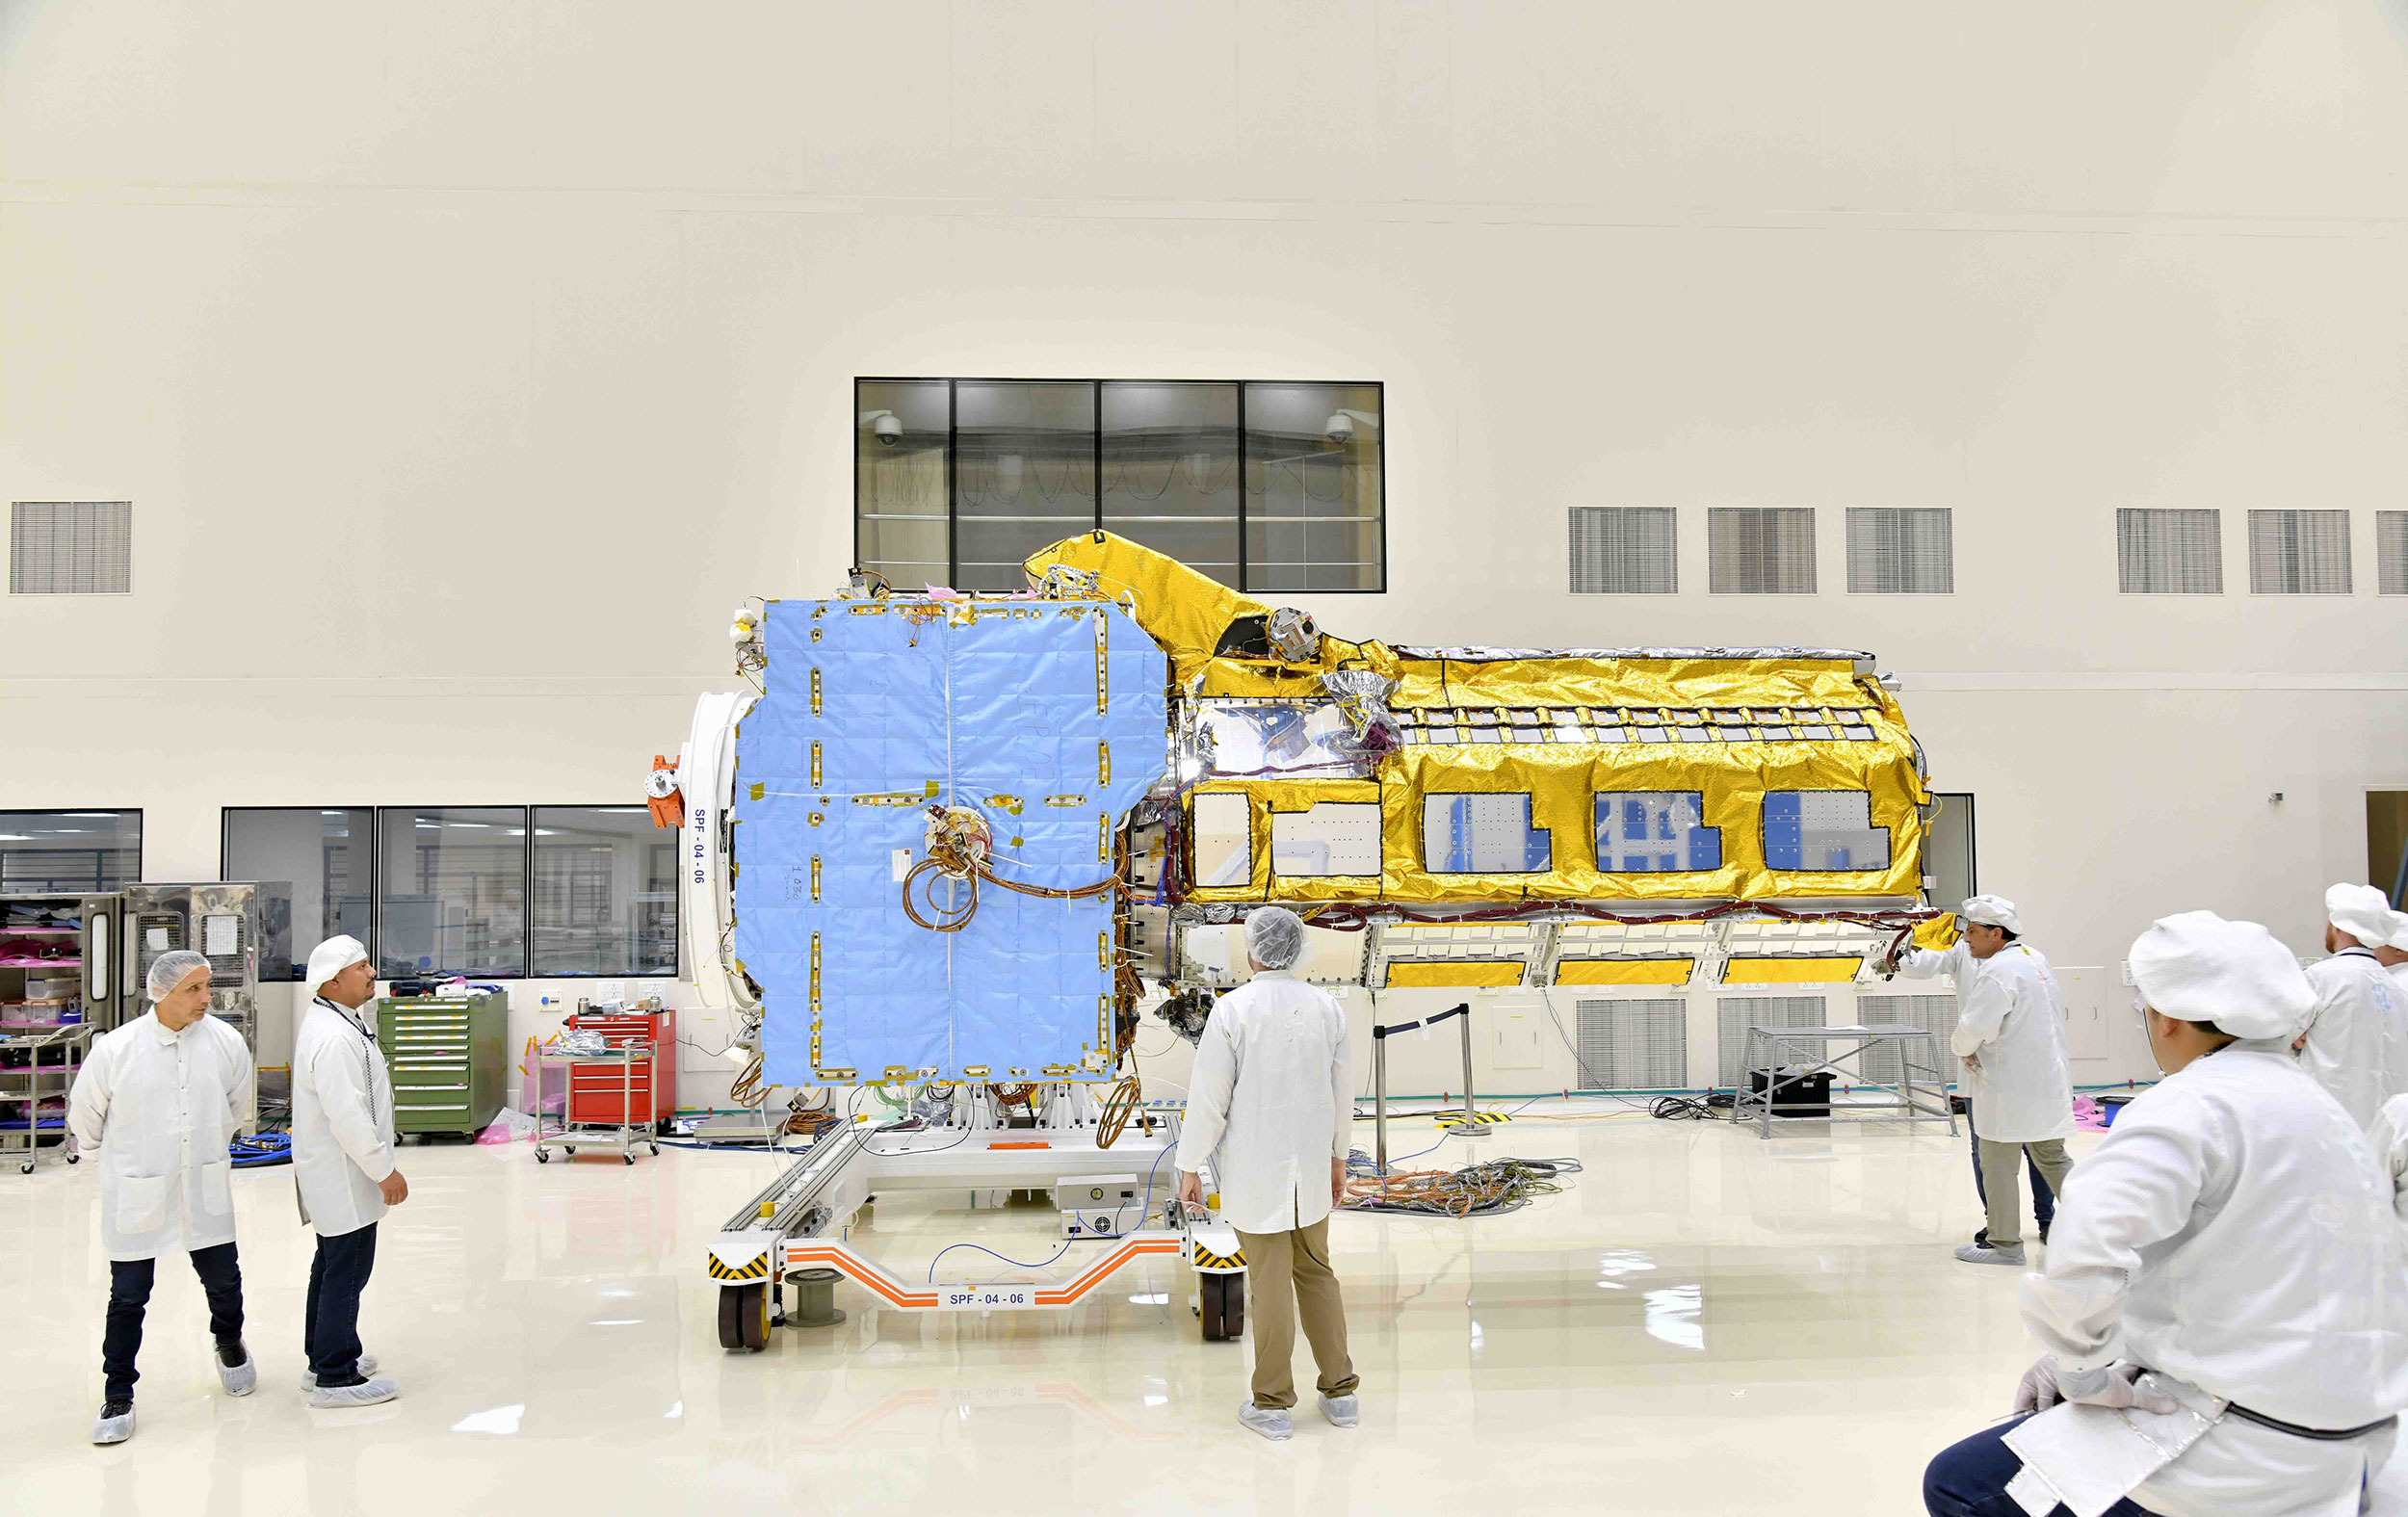 Engineers joined the two main components of NISAR – the spacecraft bus and the radar instrument payload – in an ISRO clean room in Bengaluru, India, in June. The payload arrived from NASA’s Jet Propulsion Laboratory in Southern California in March, while the bus was built at the ISRO facility. Credit: VDOS-URSC
